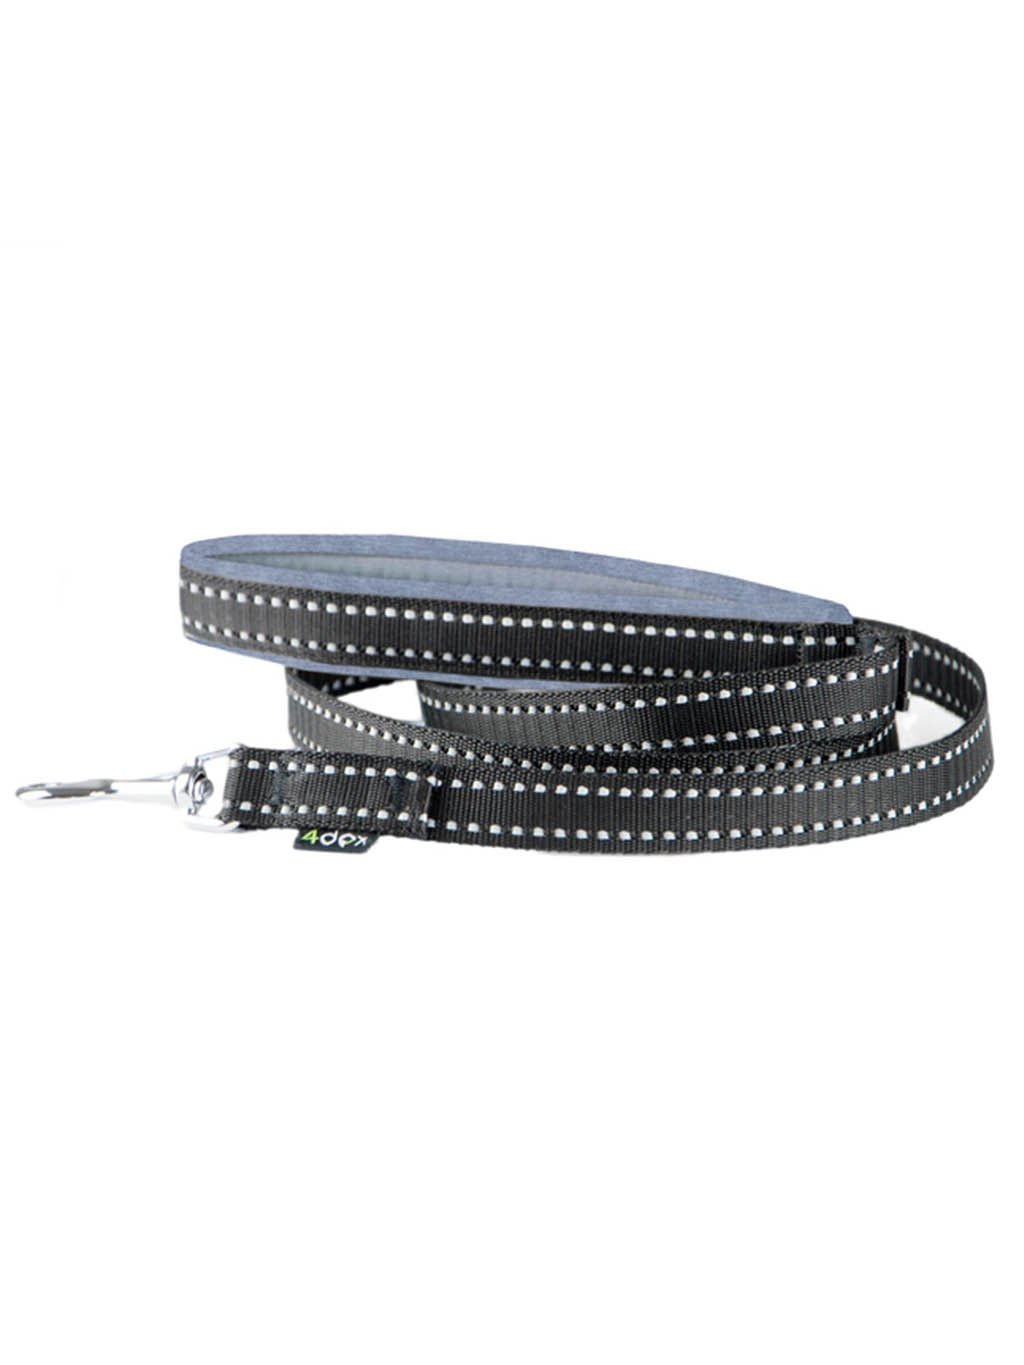 Leash with a reflective tape, striped grey